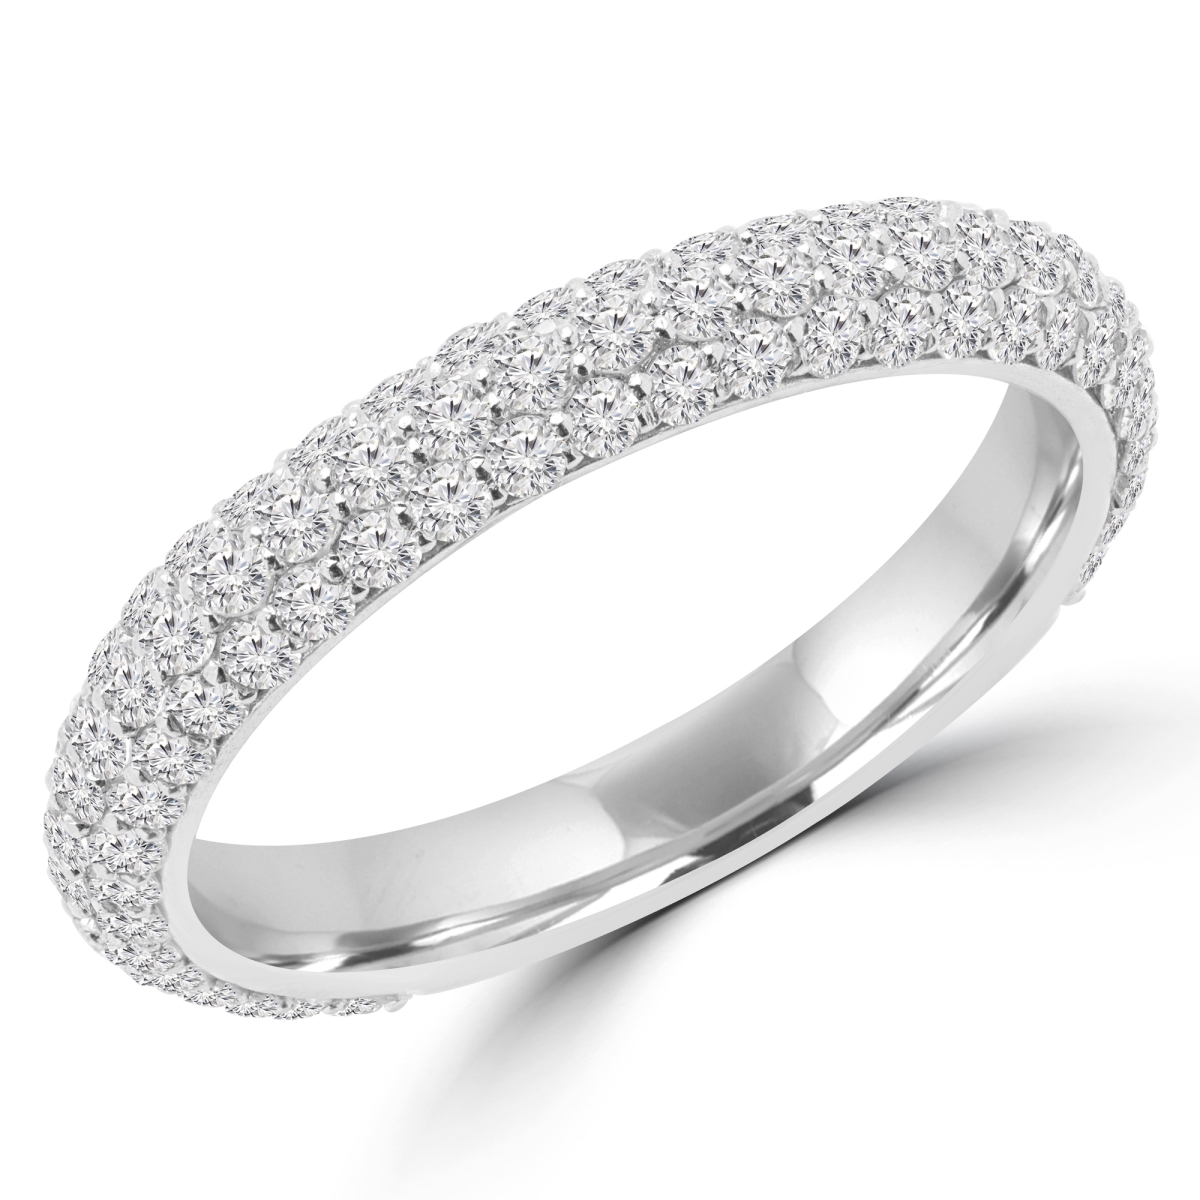 Picture of Majesty Diamonds MD170166-8 1.1 CTW Round Diamond Semi-Eternity Wedding Band Ring in 14K White Gold - 8